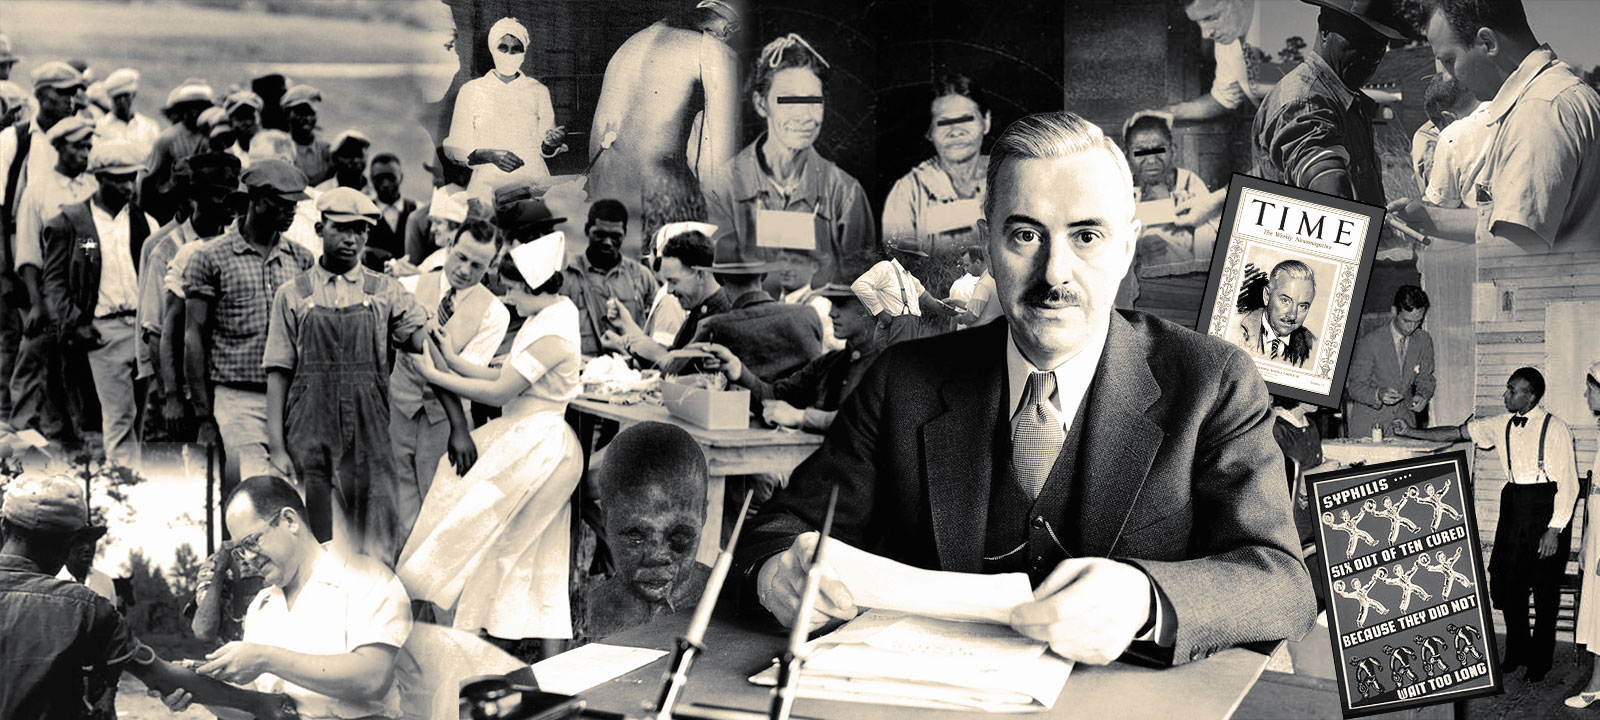 Thomas Parran Jr. and the Tuskegee “experiments”